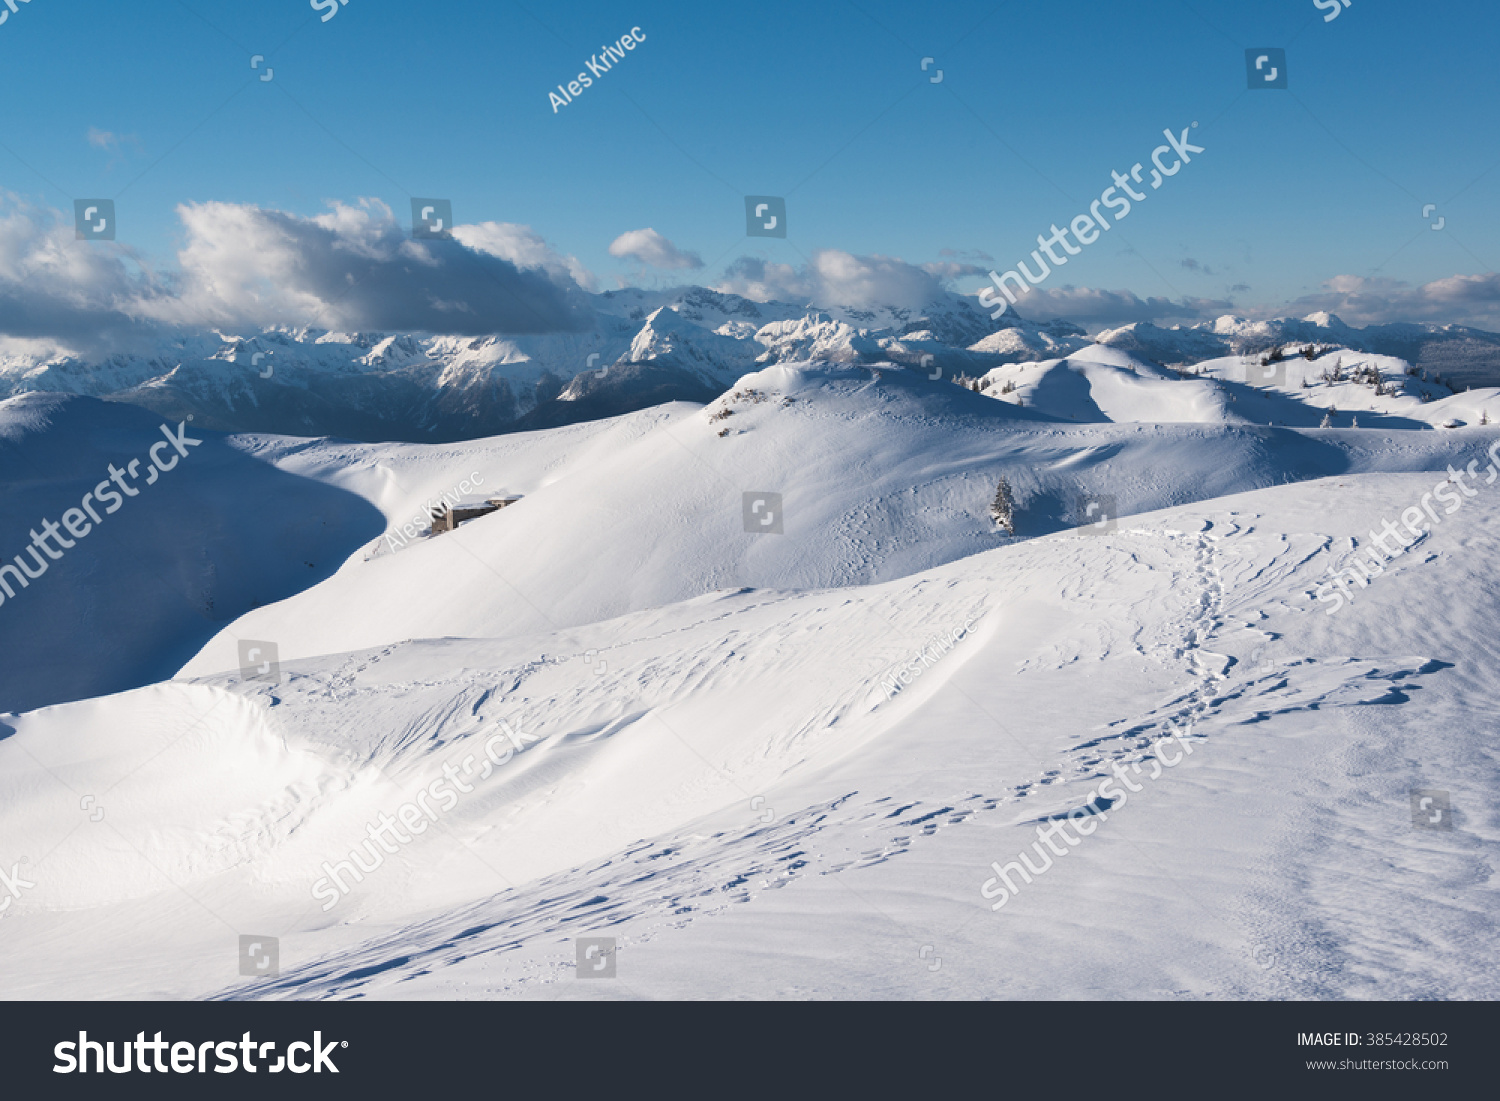 Winter landscape in the high mountains #385428502